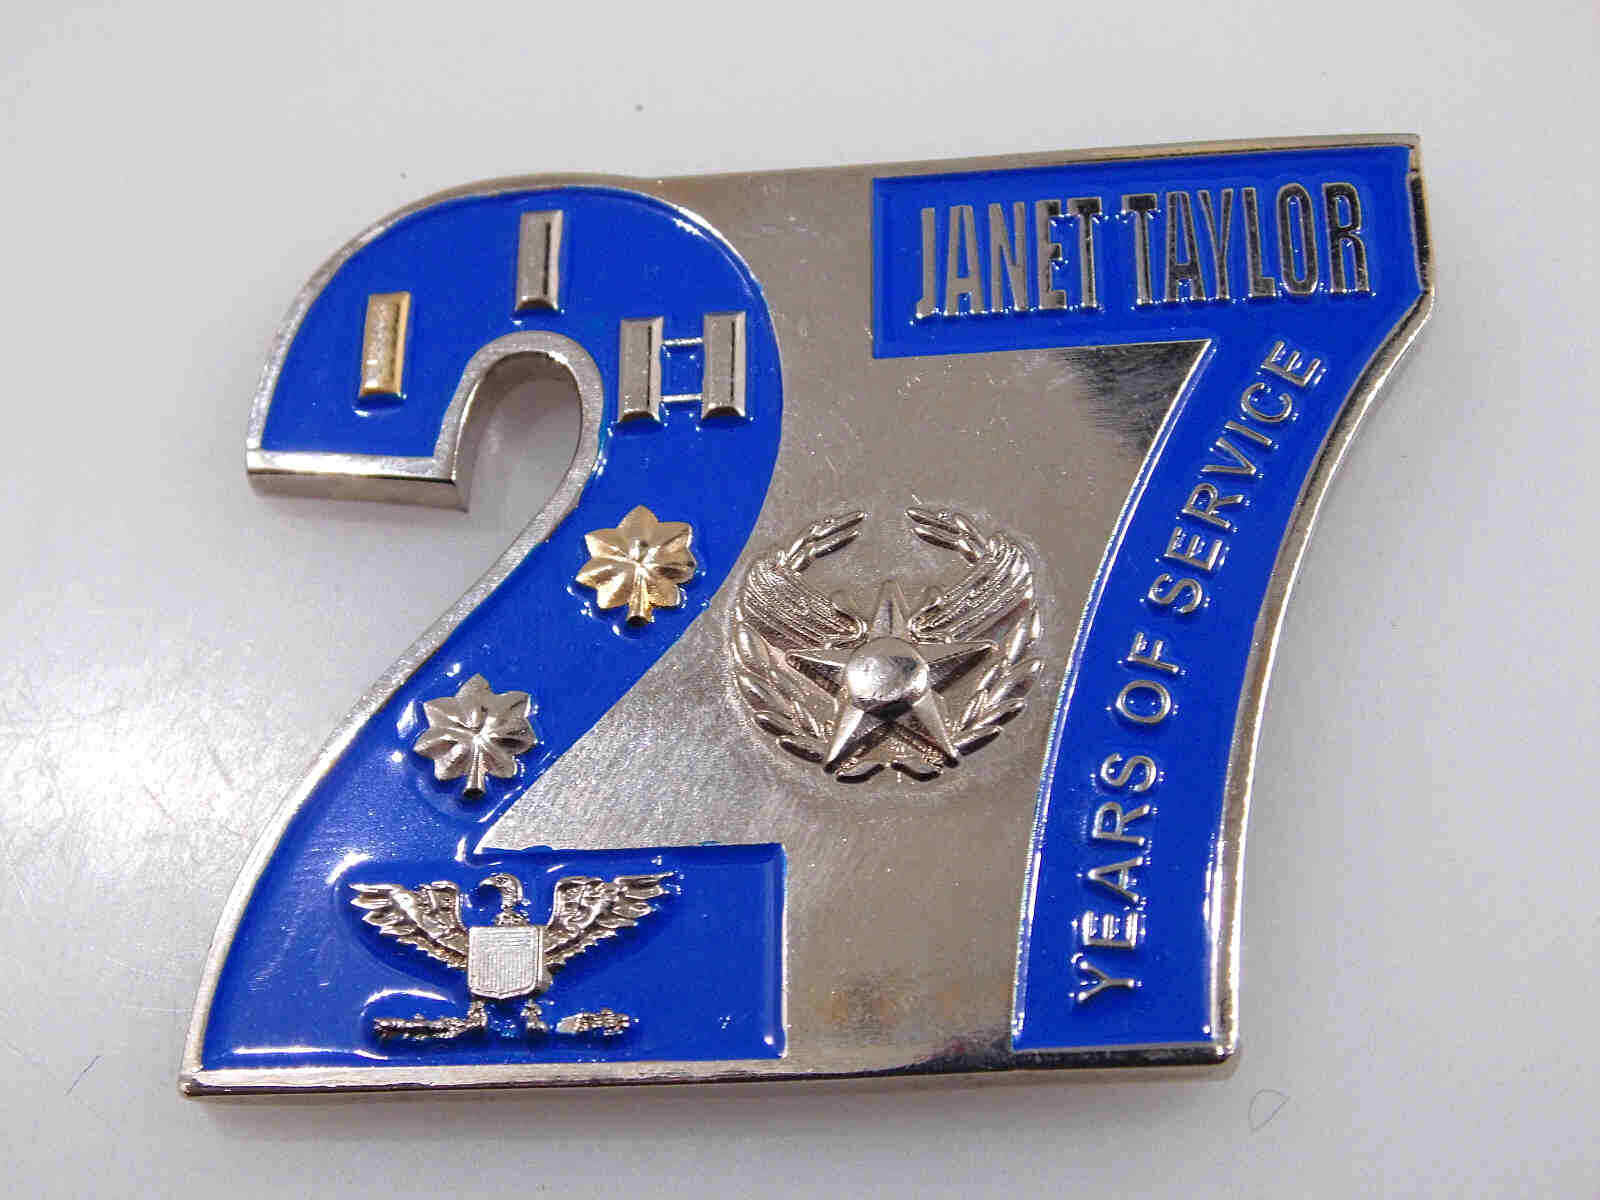 UNITED STATES AIR FORCE JANET TAYLOR 27 YEARS OF SERVICE CHALLENGE COIN